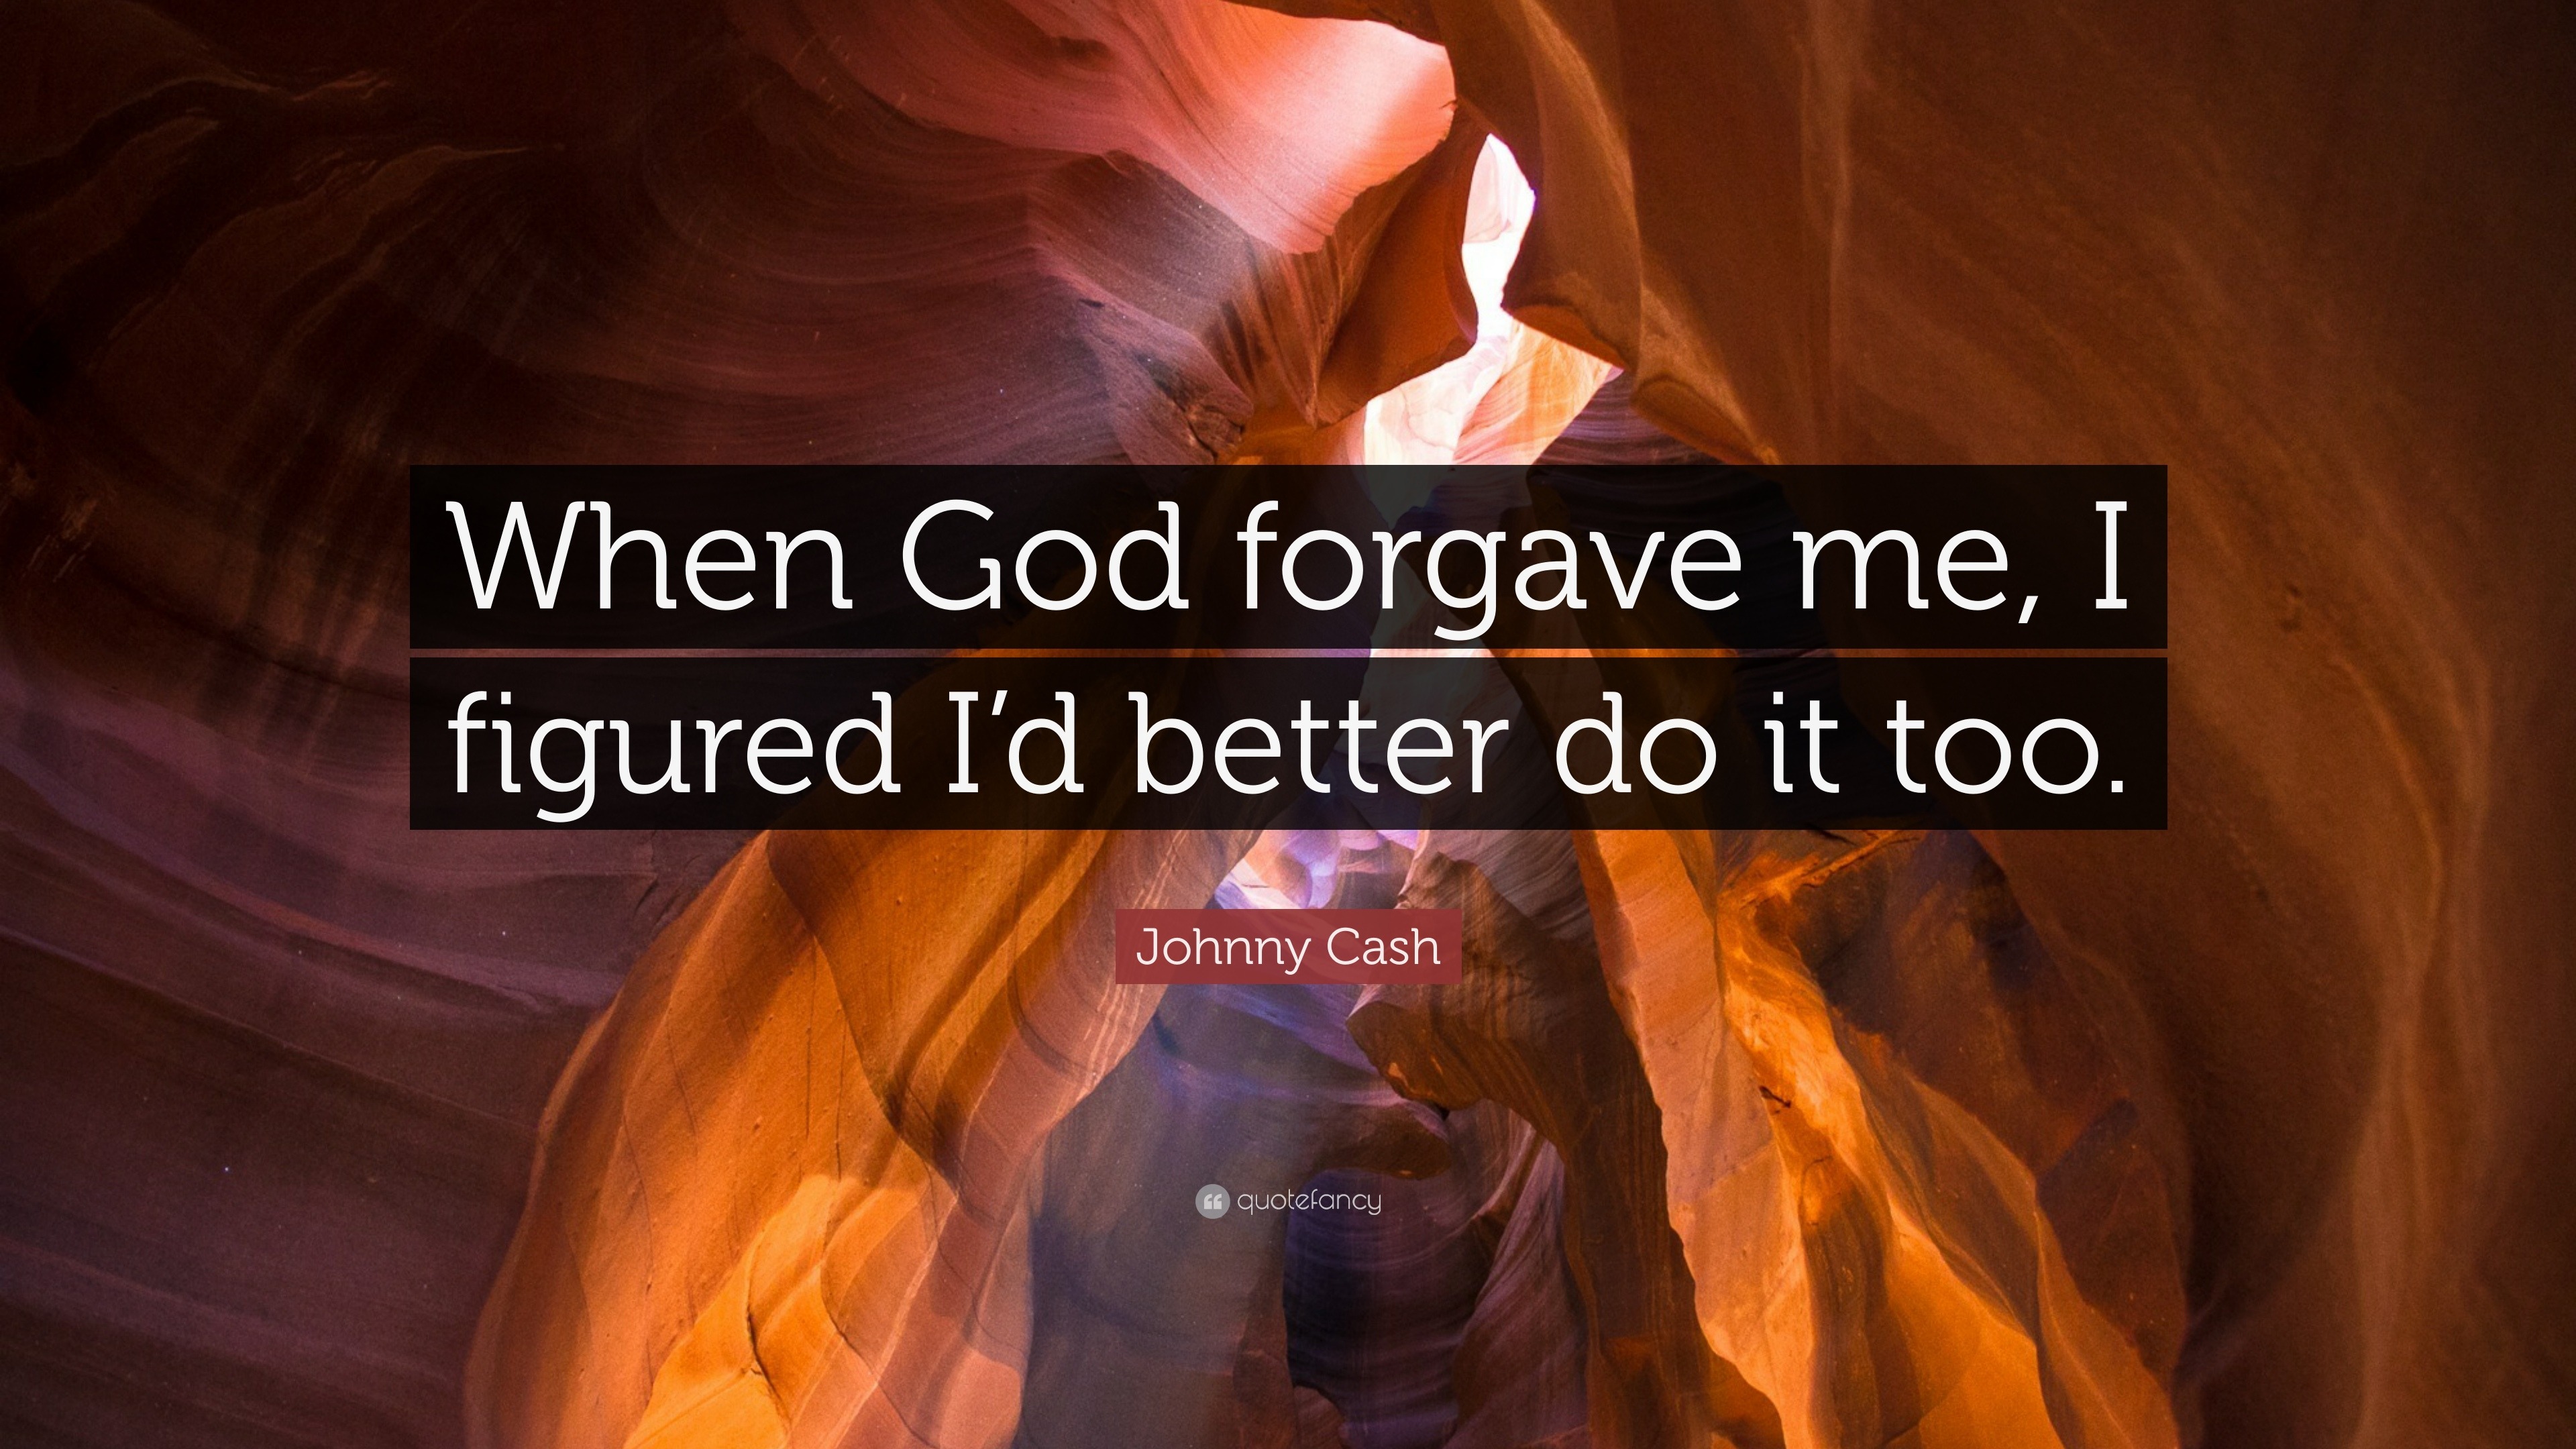 johnny cash quote: "when god forgave me, i figured i"d better do